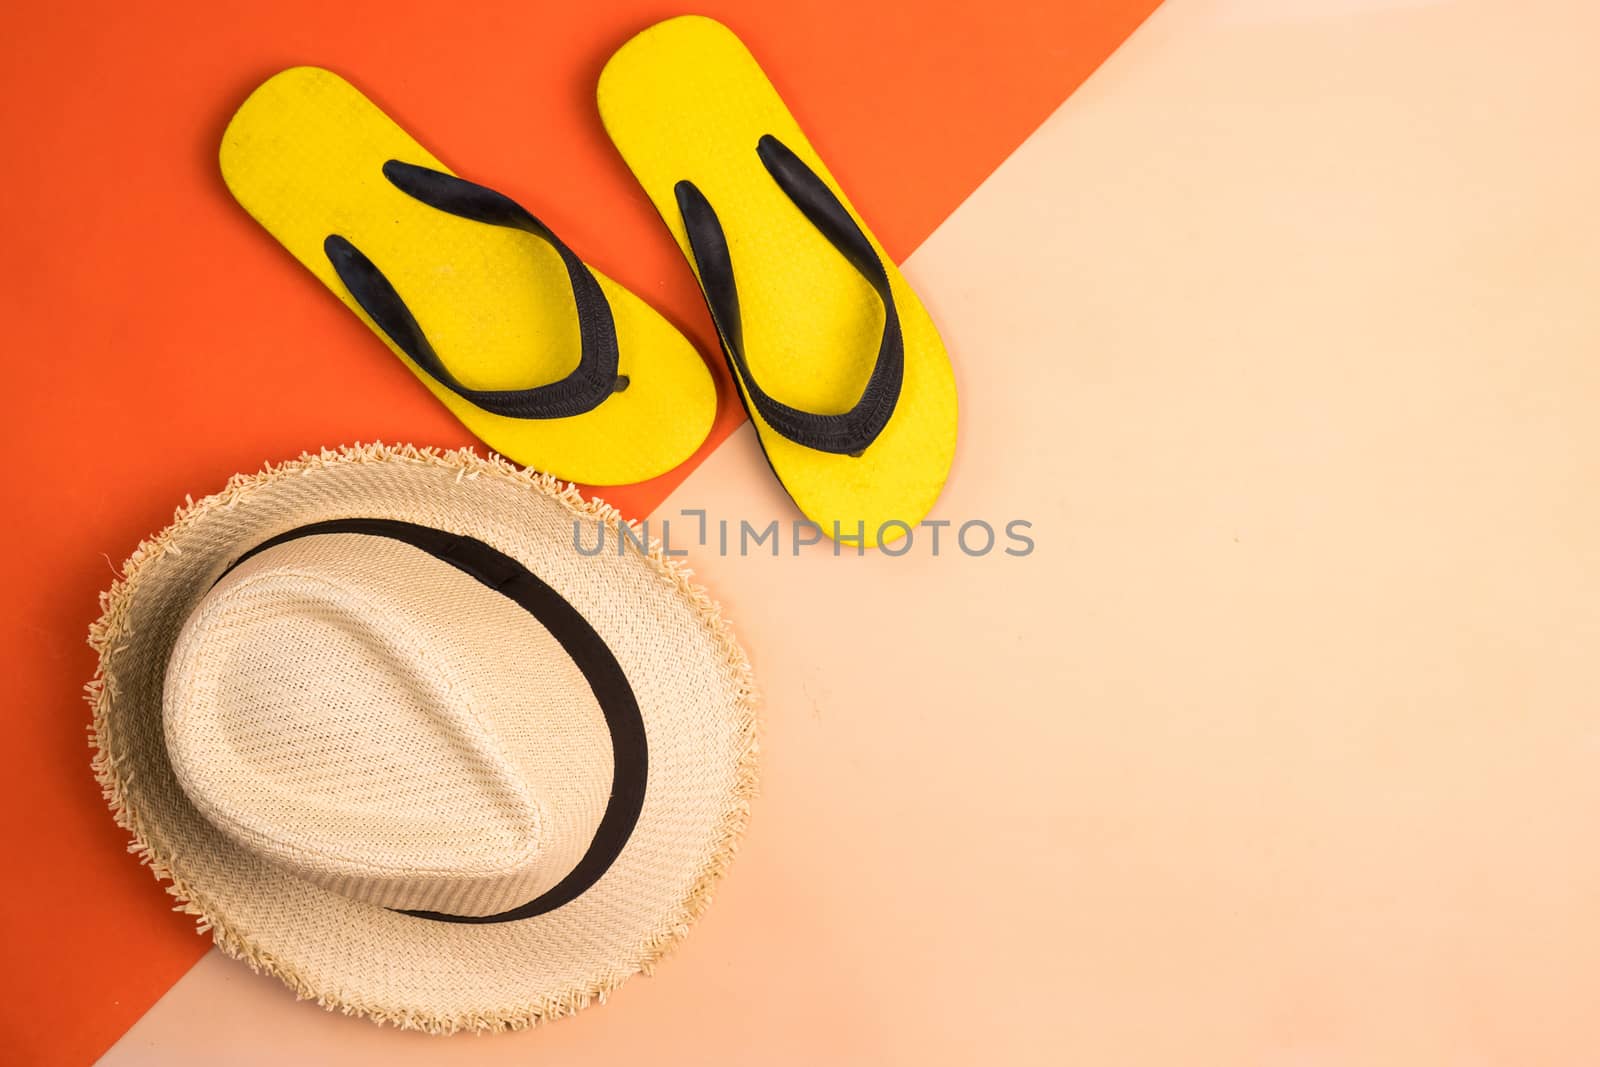 Beach hat and rubber slippers on colors background.